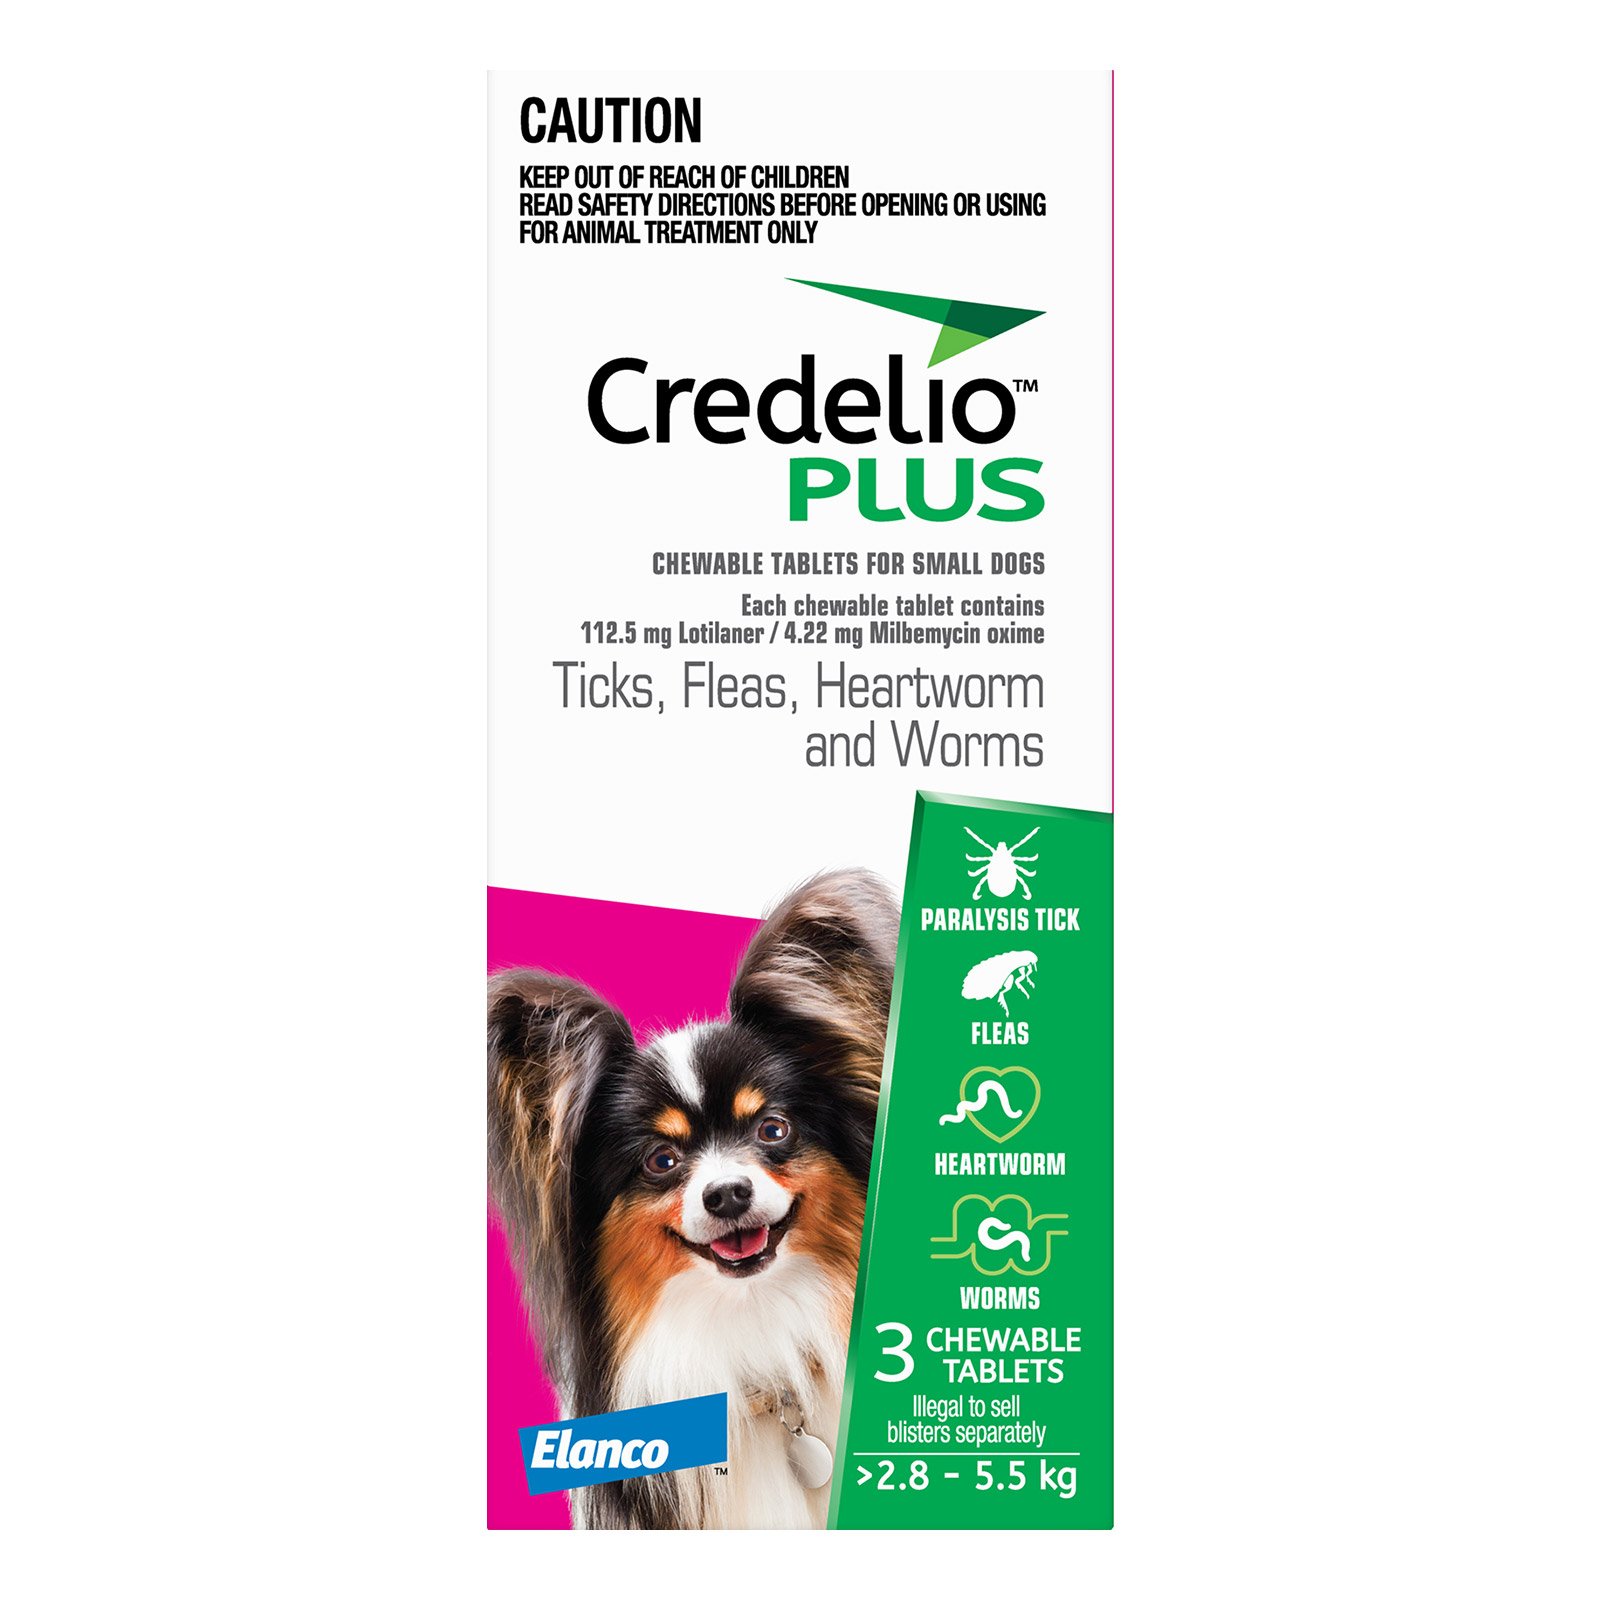 credelio-plus-2.8-5.5kg-for-small-dogs-pink.jpg